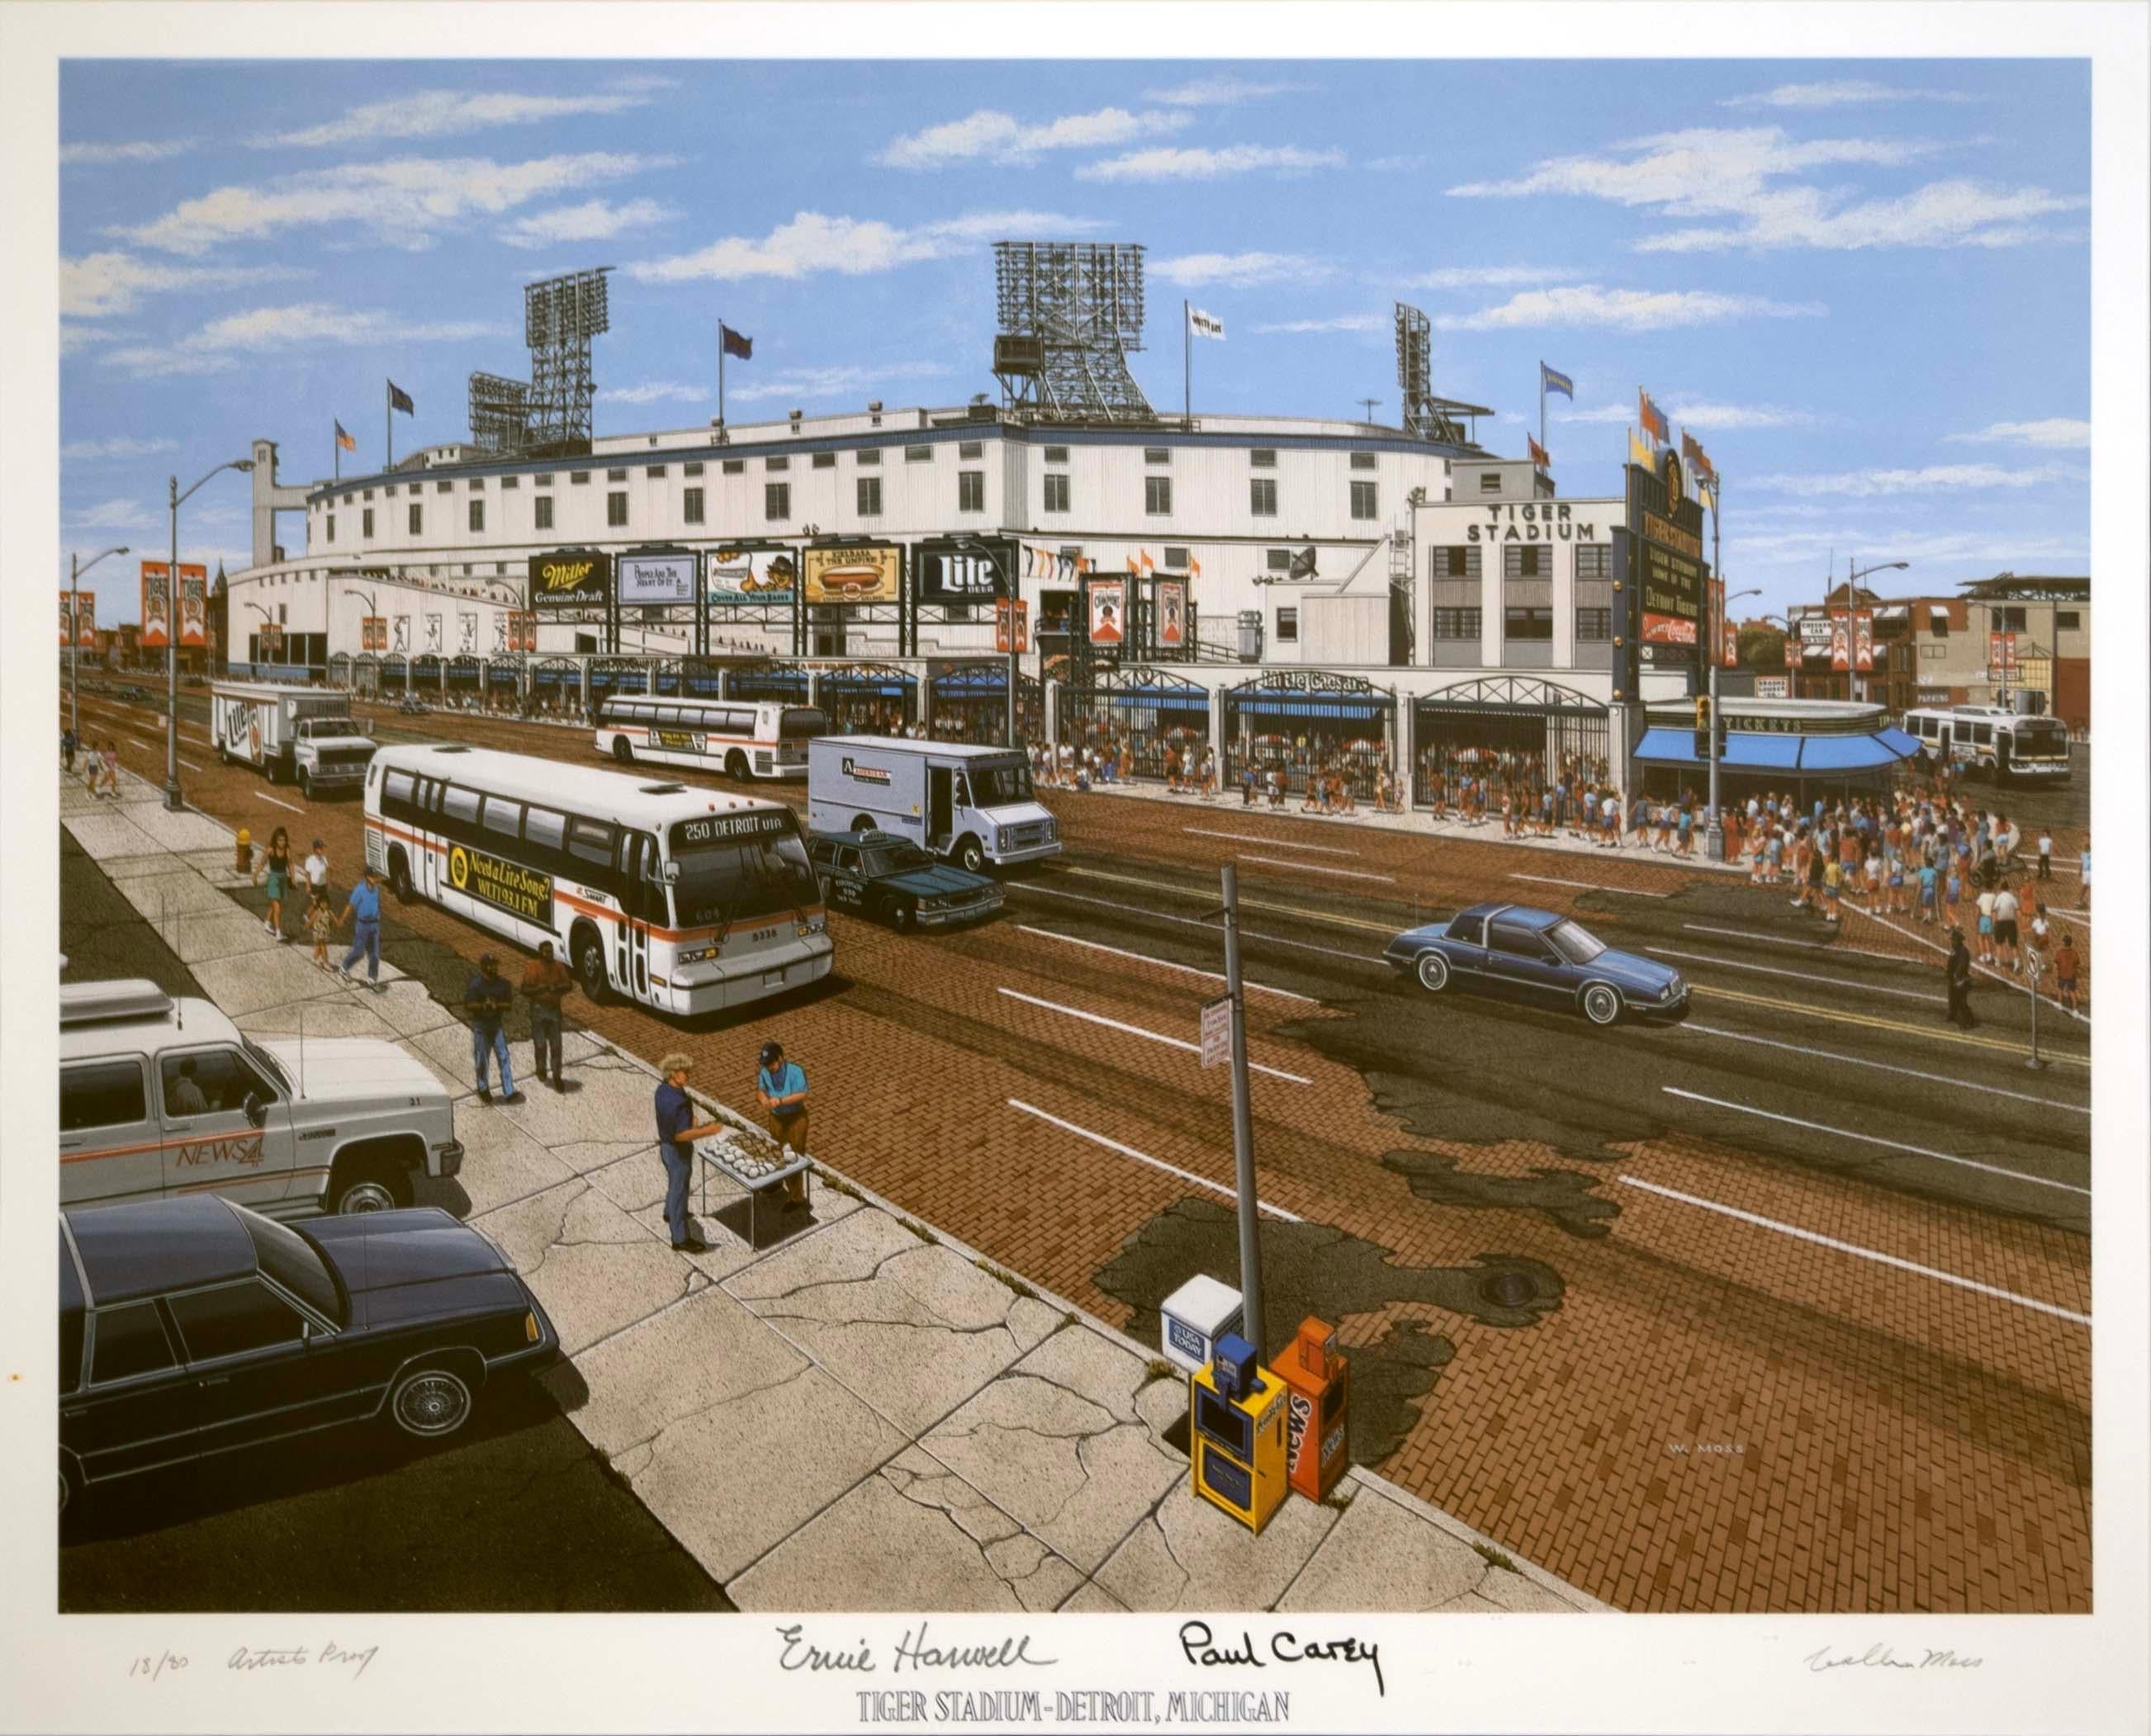 A nostalgic collector's item for Detroit baseball fans --; a vintage limited-edition lithograph by William Moss featuring Tiger Stadium. Previously known as Navin Field and Briggs Stadium, located in the Corktown neighborhood of Detroit, MI. The